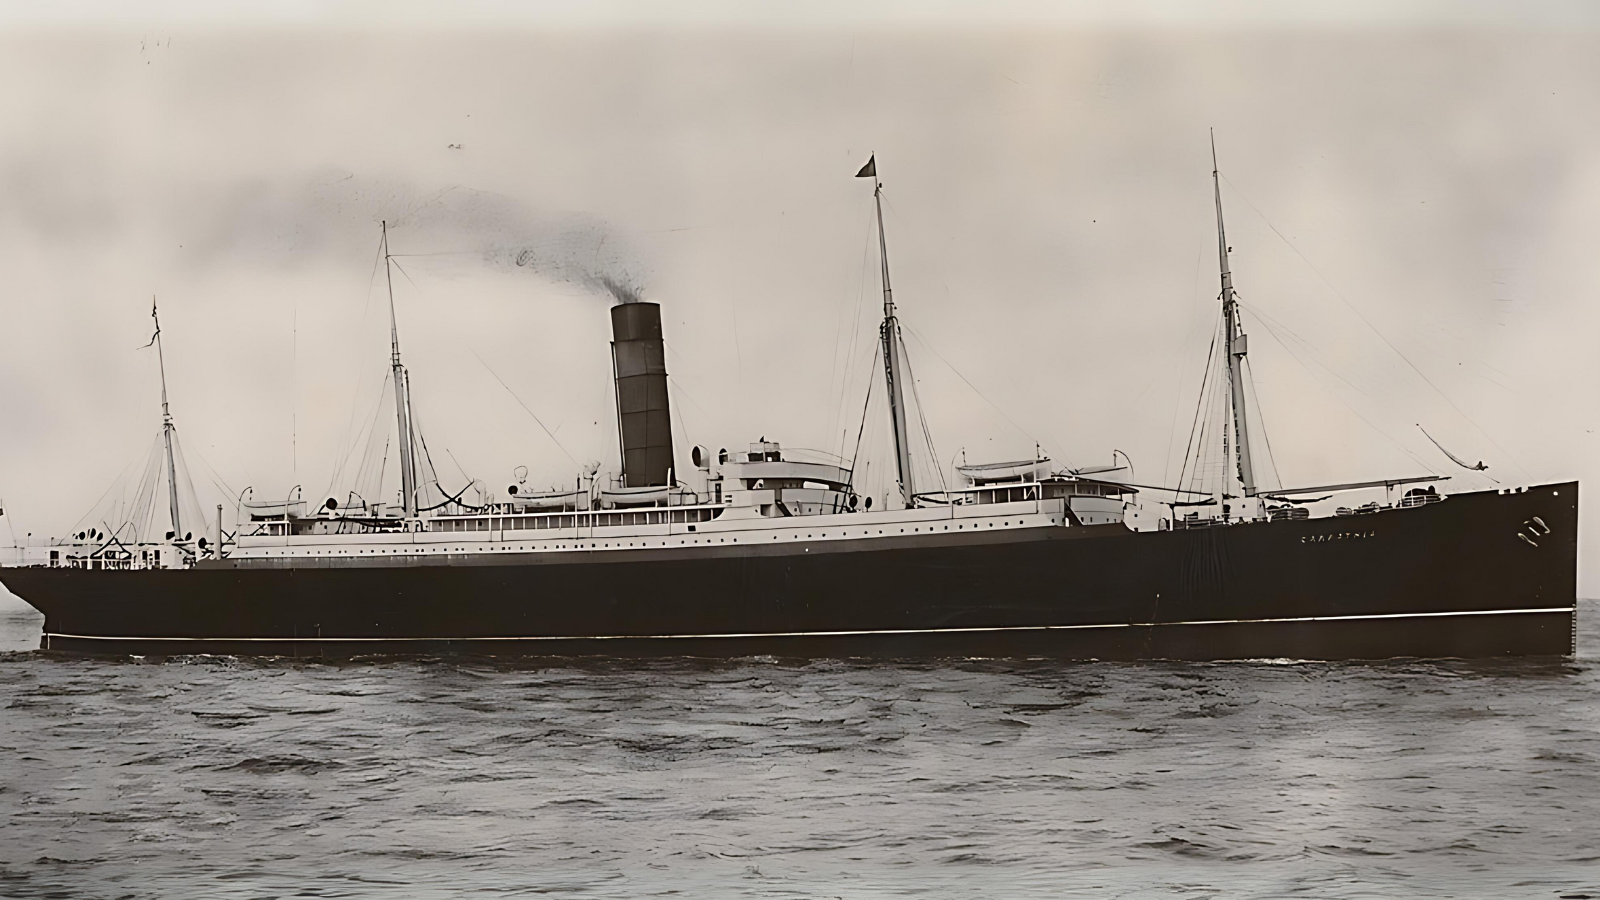 The Cunard Line's RMS Carpathia, which rescued the survivors of the RMS Titanic's sinking
